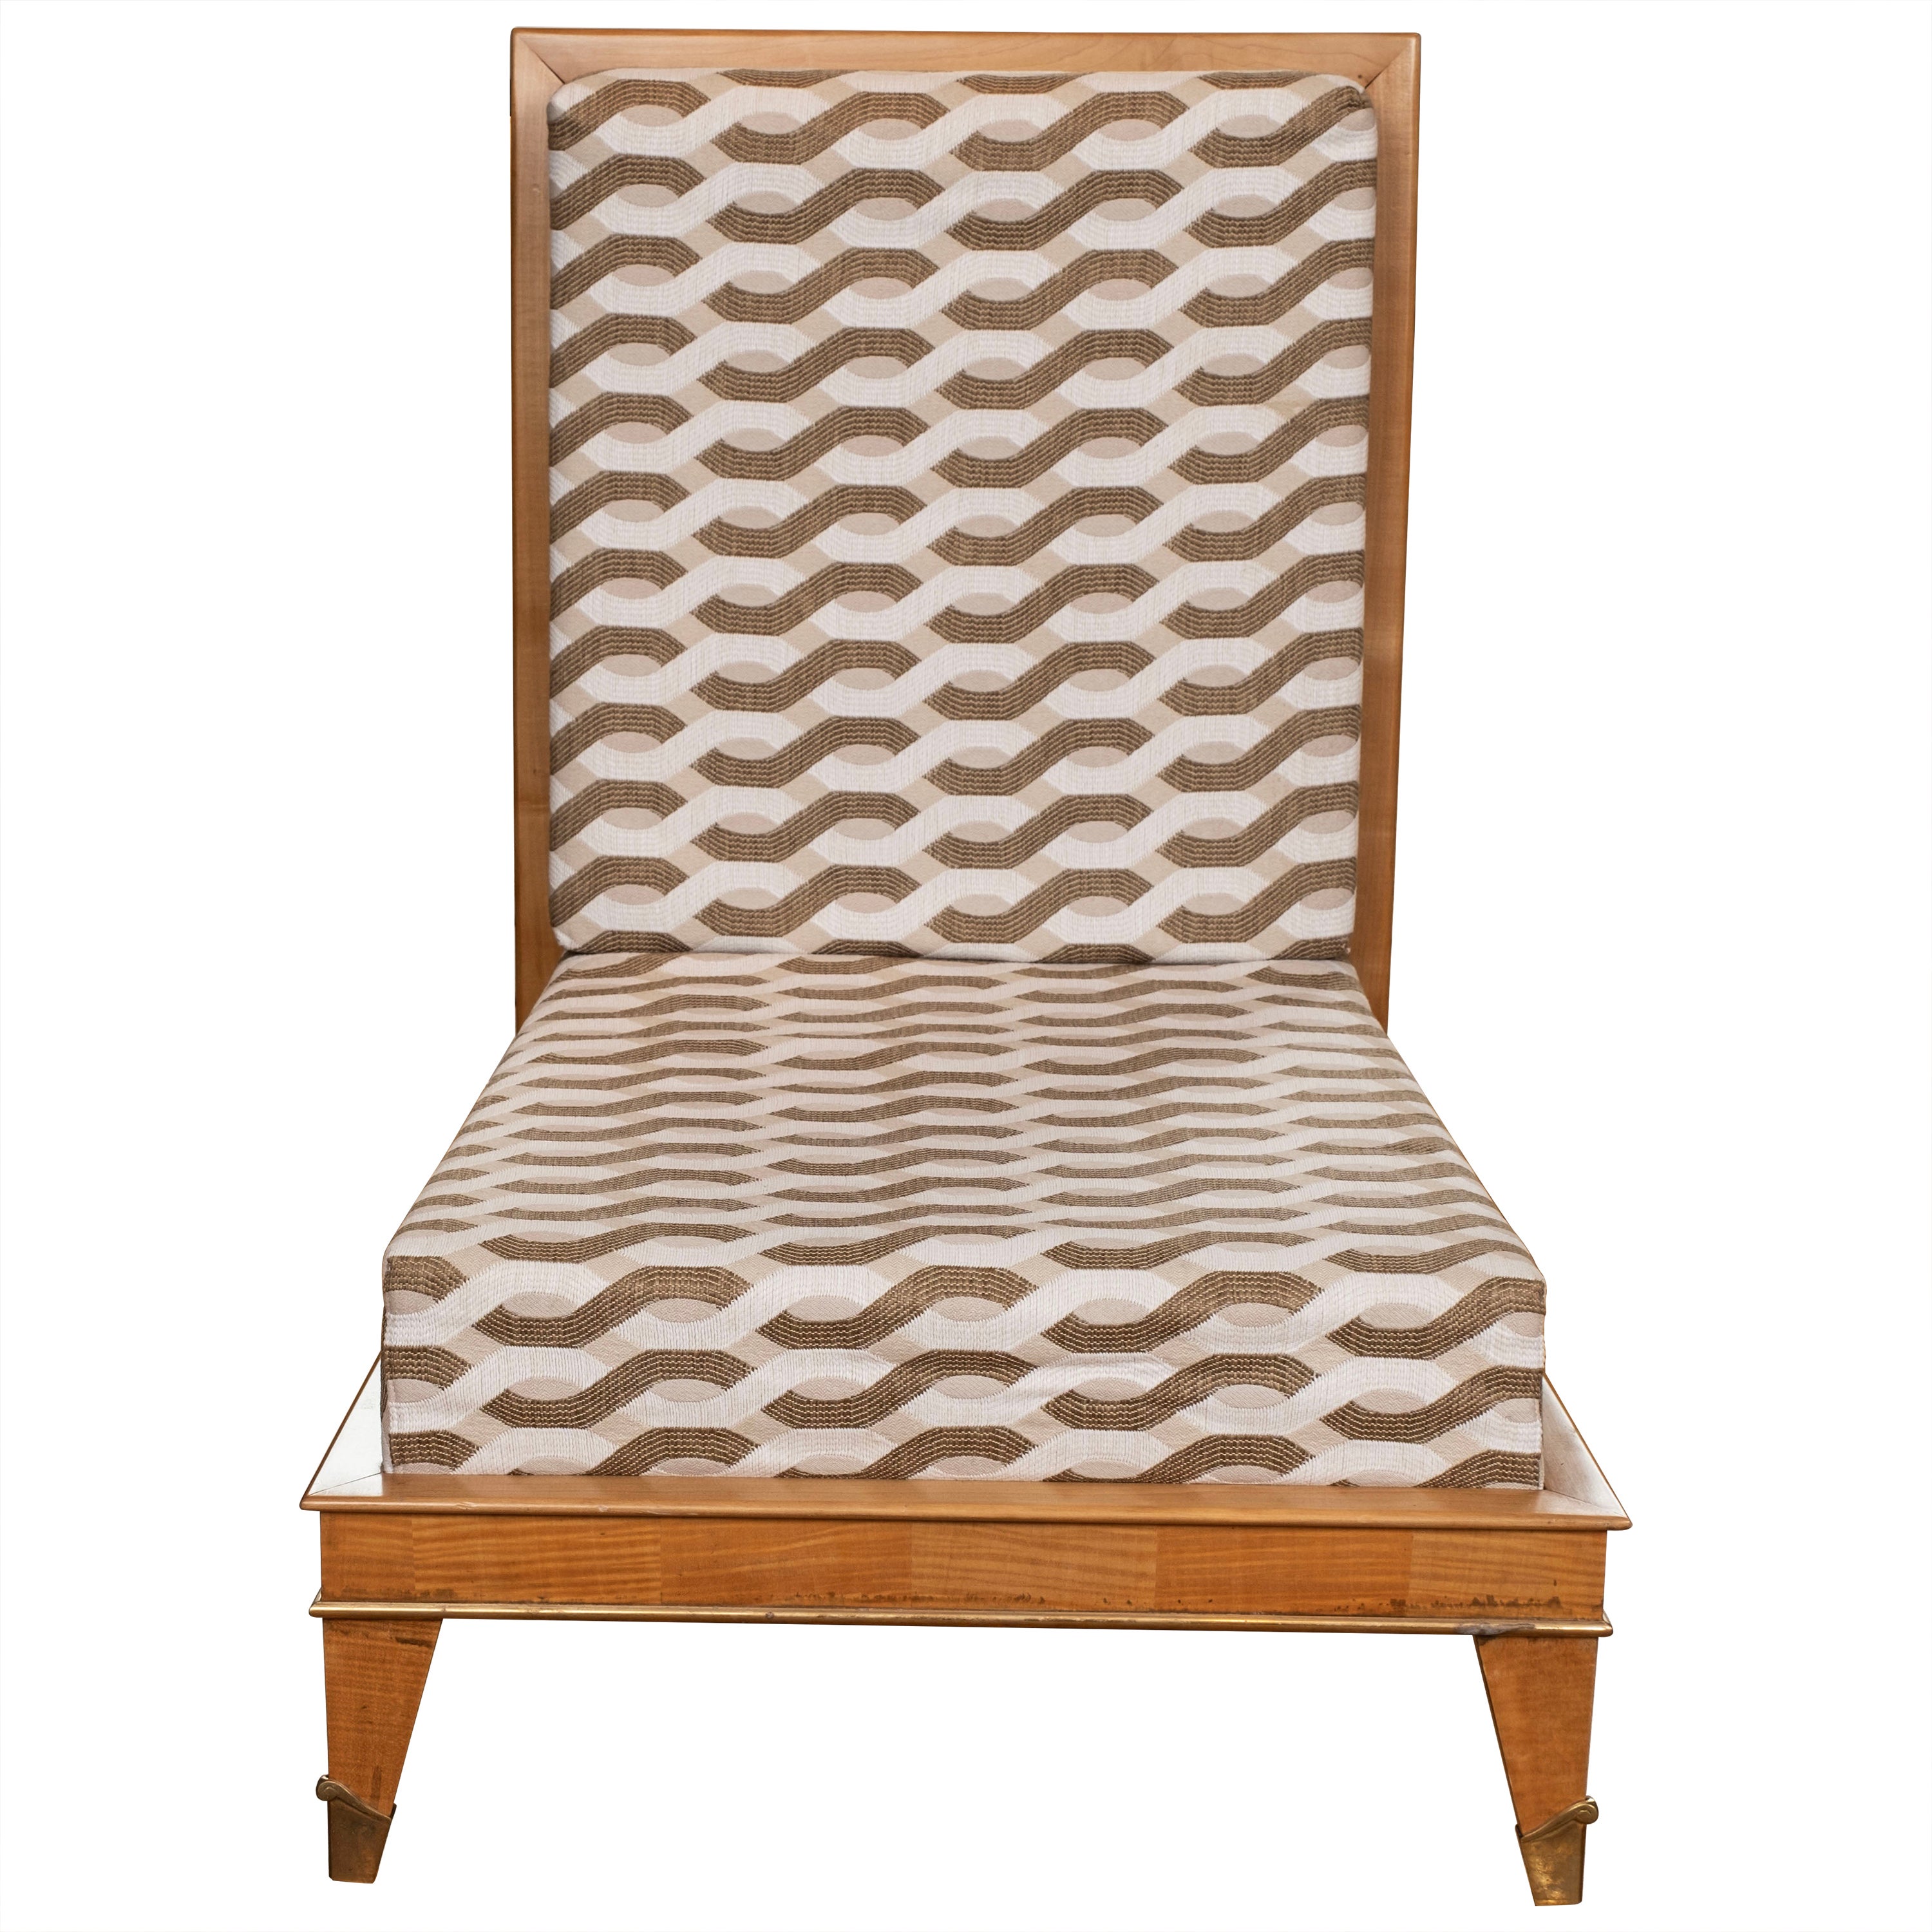 French modern chair attributed to Maurice Jallot.
This French Art Deco or French Art Moderne chair, side chair, chauffeuse or slipper chair is made of sycamore and newly upholstered in a beautiful
geometric print. Our chic sculptural chair